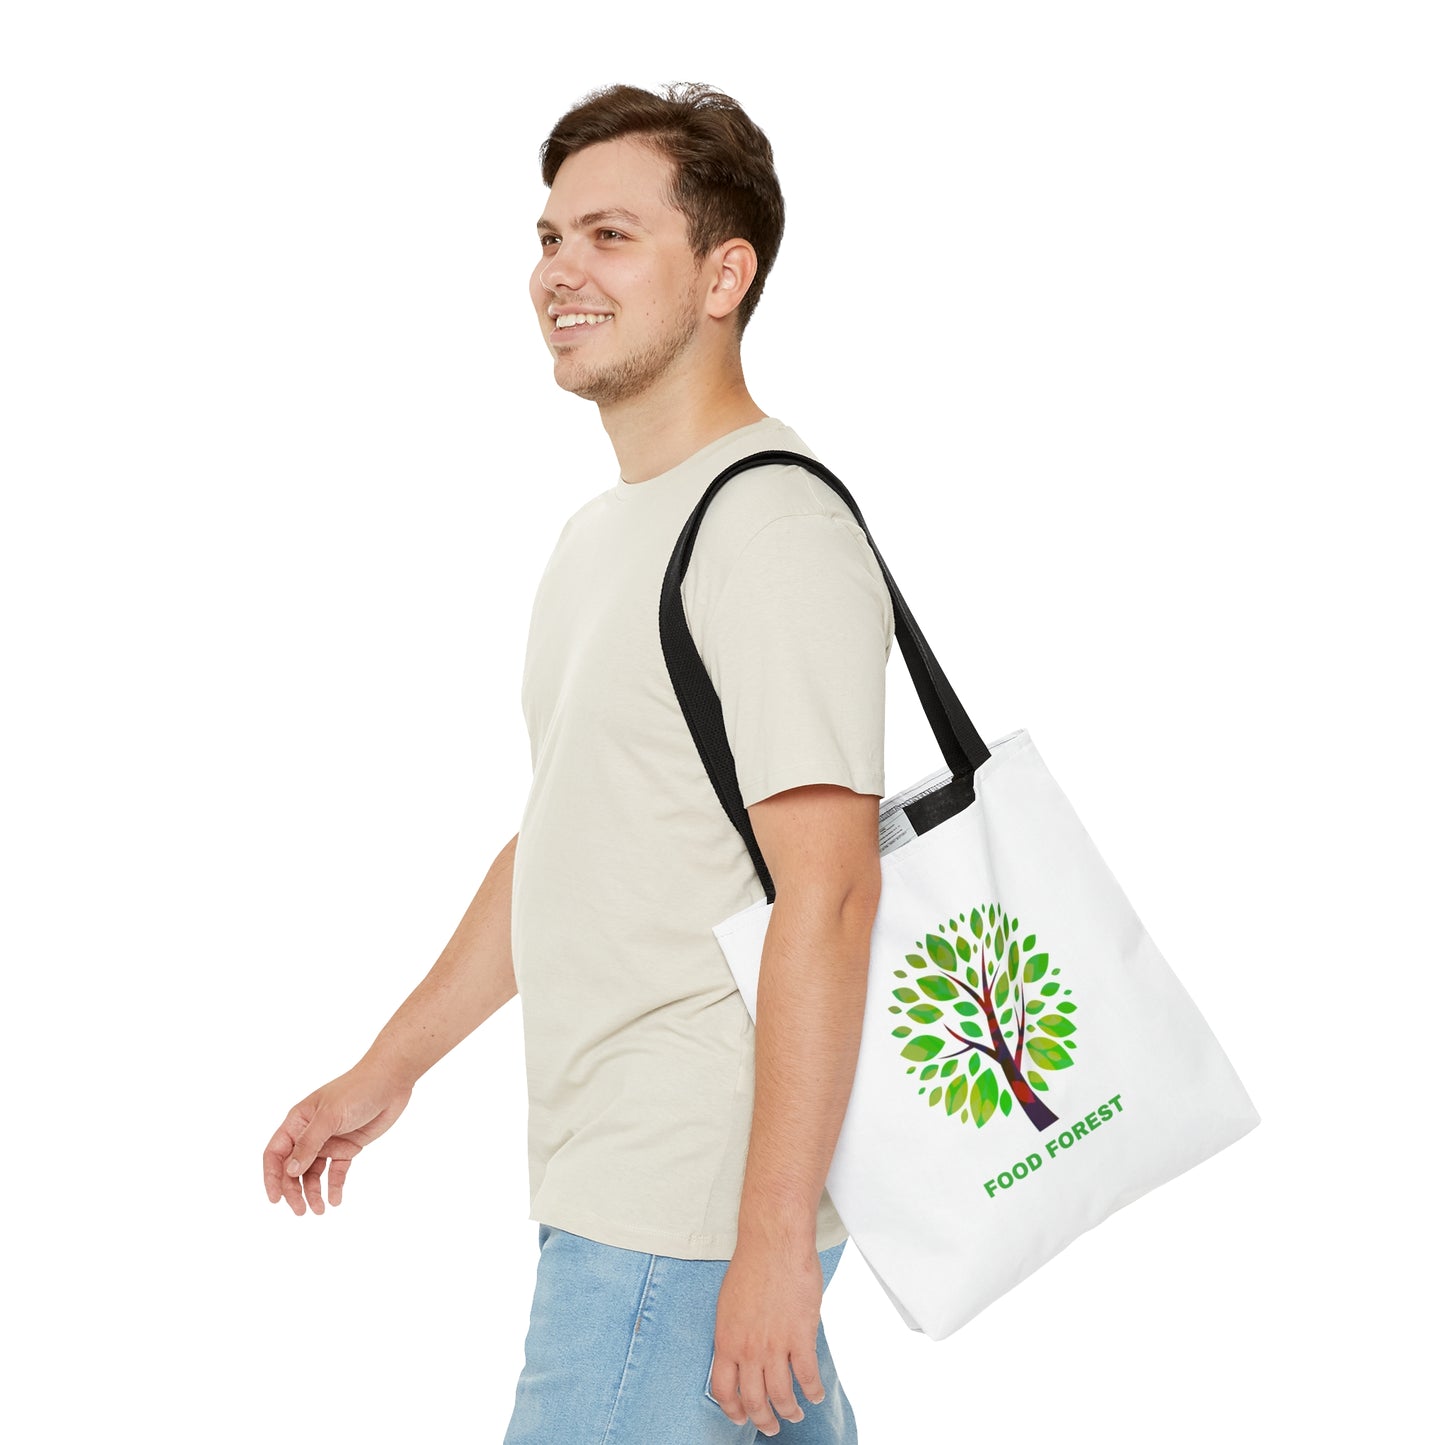 FOOD FOREST Tote Bag, White